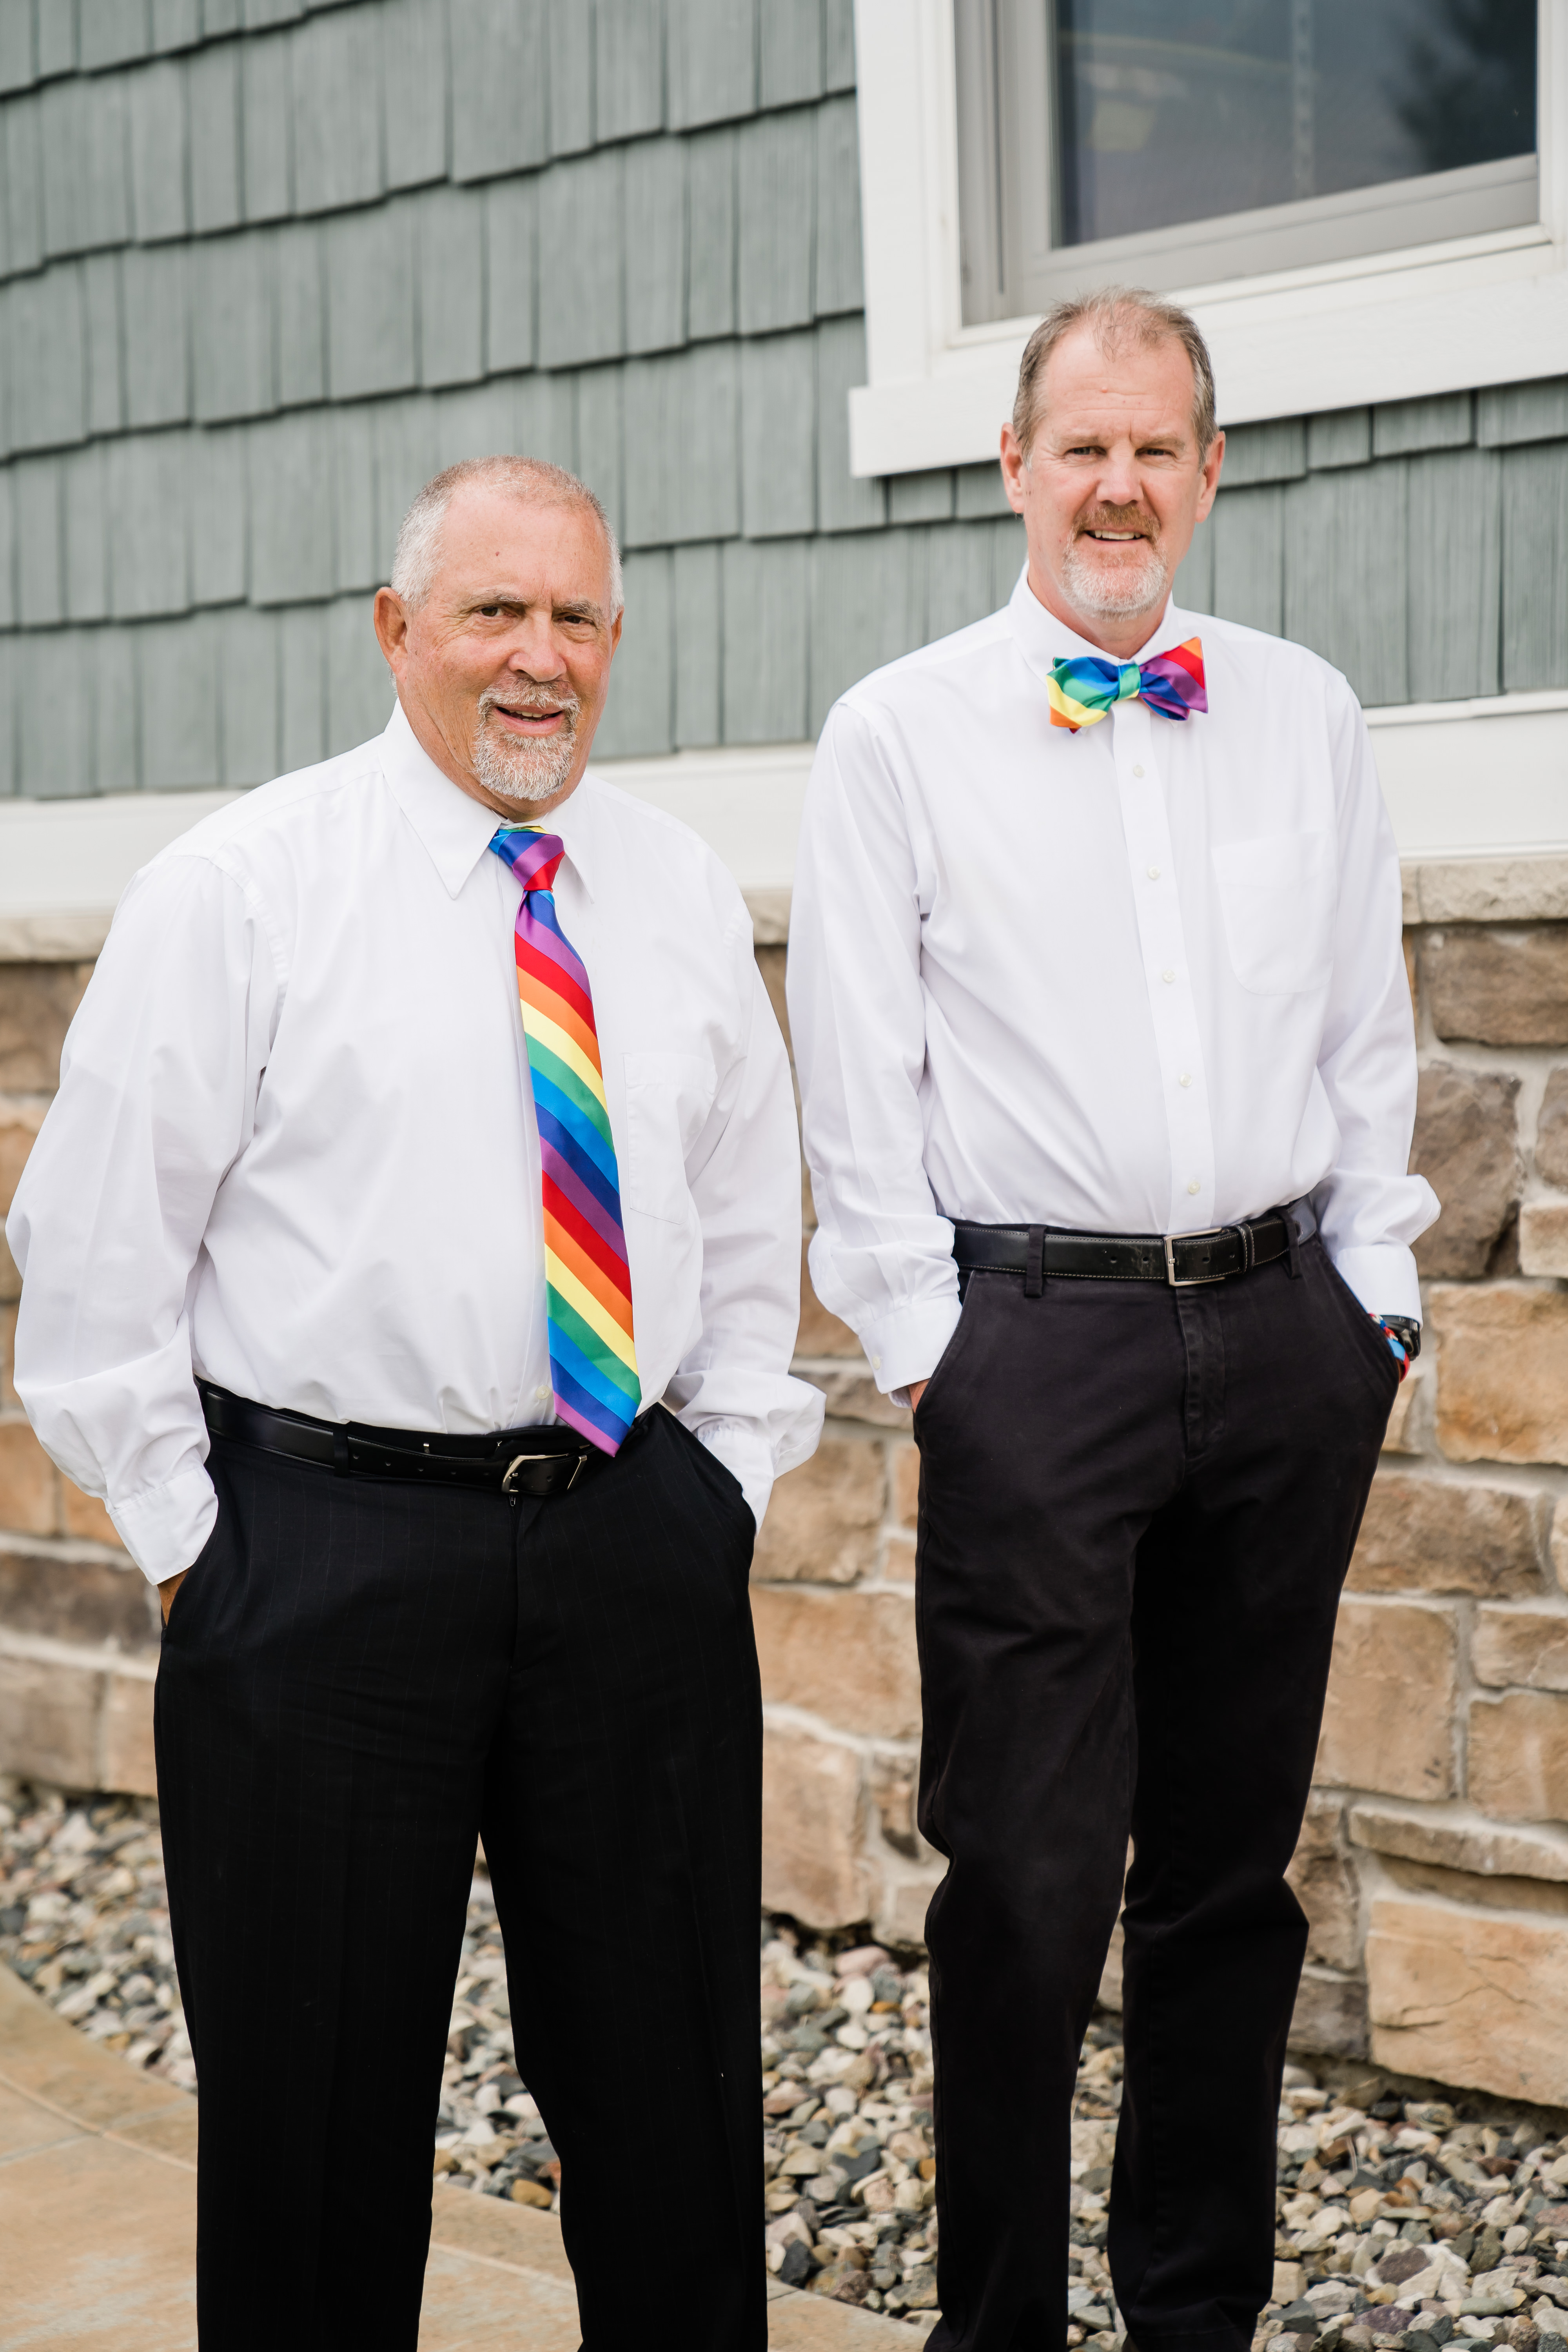 fathers of brides standing together wearing rainbow bow tie and tie